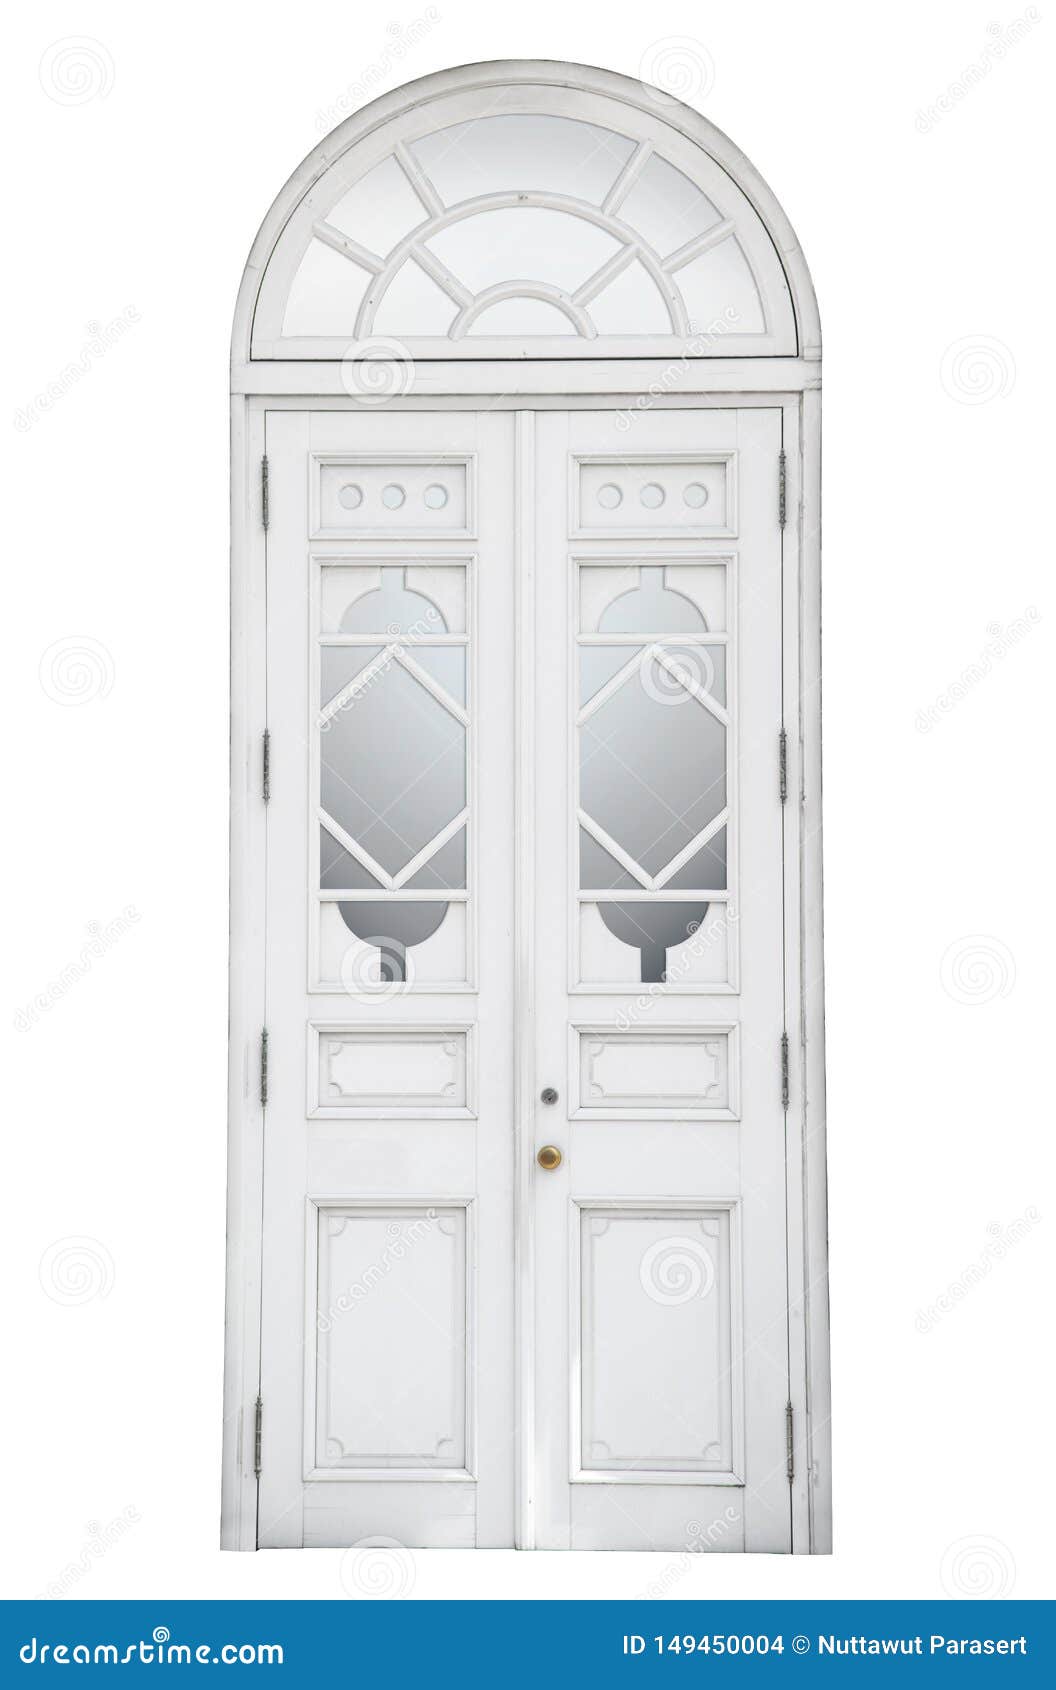 Classic White Wood Door And Window In Vintage Style Isolated On White ...